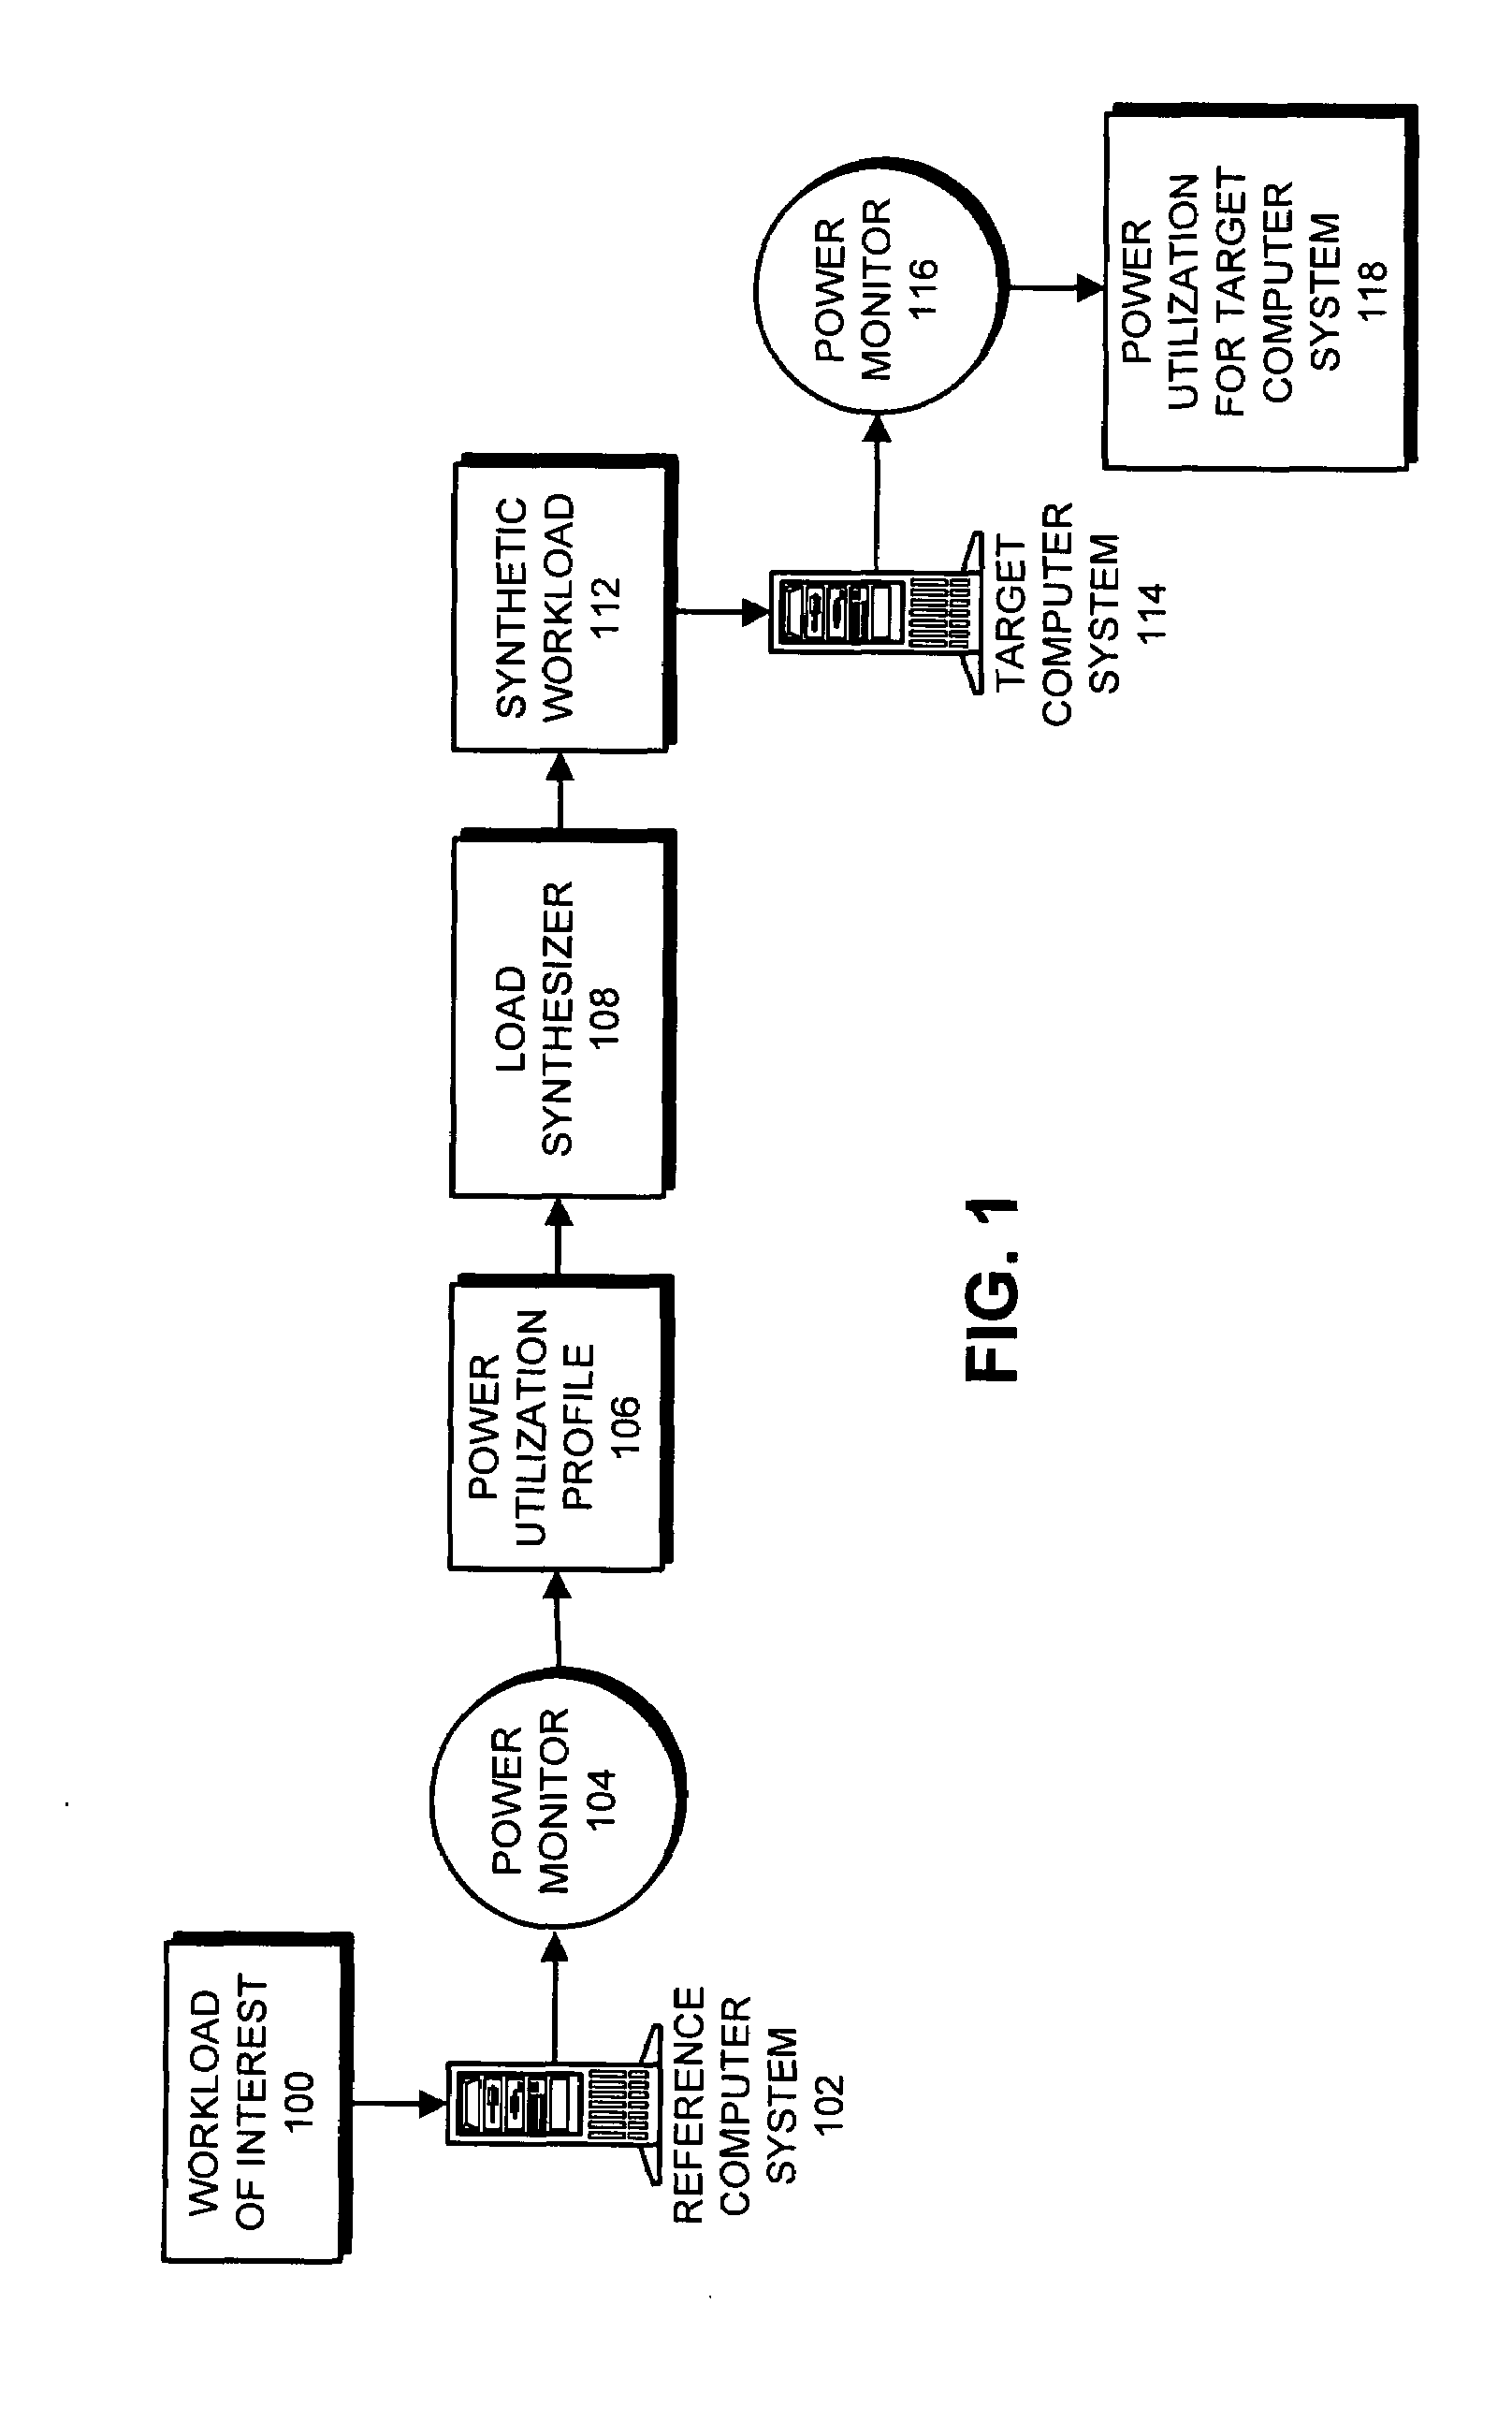 Generating synthetic workloads to measure power utilization in a computer system